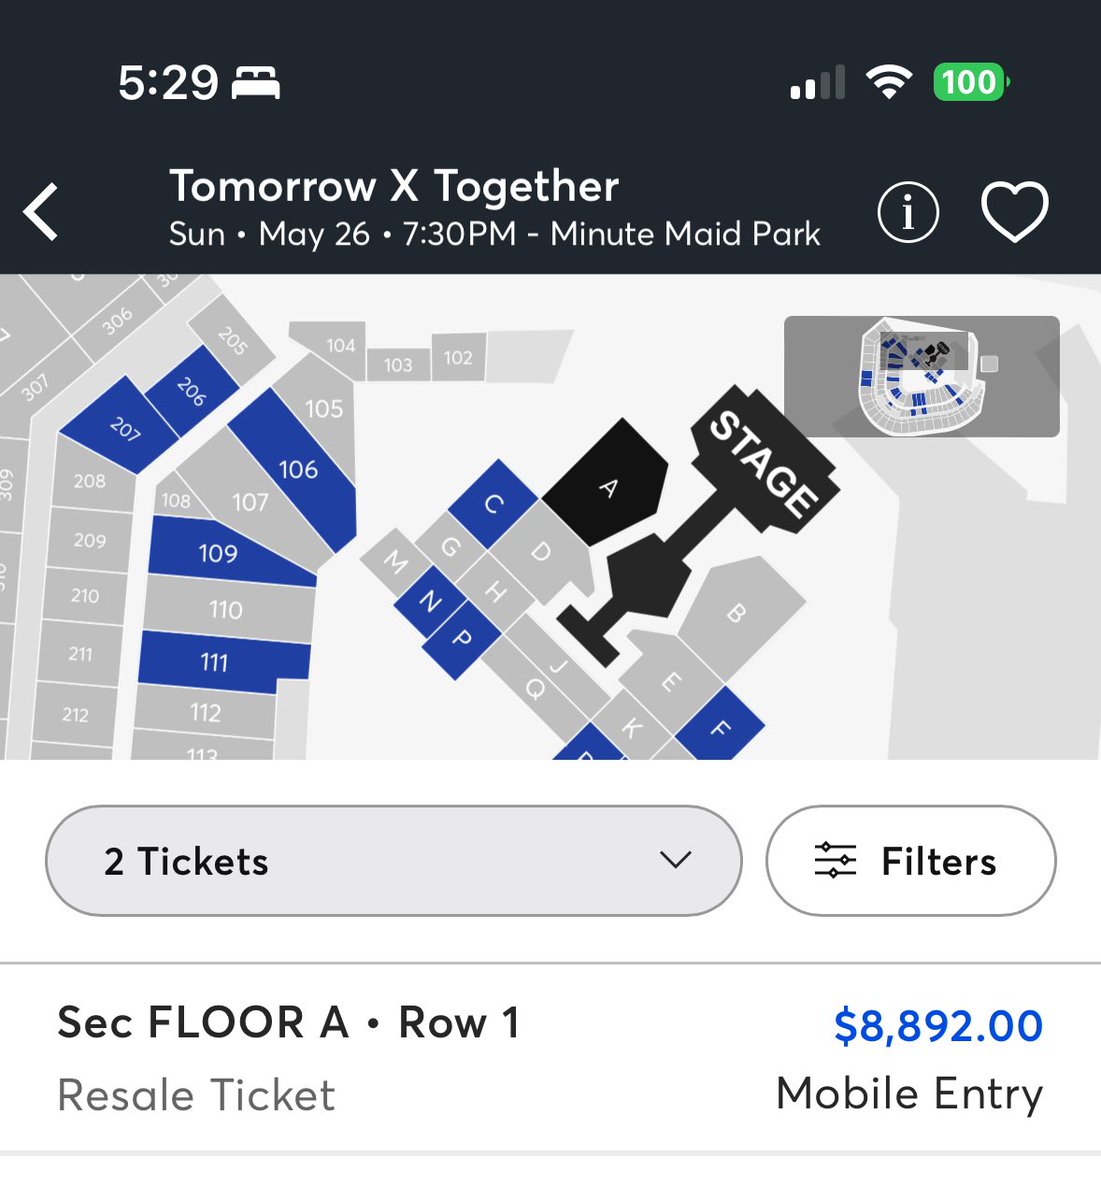 WHAT THE FUCK?? people reselling TXT tickets need hell 😭😭